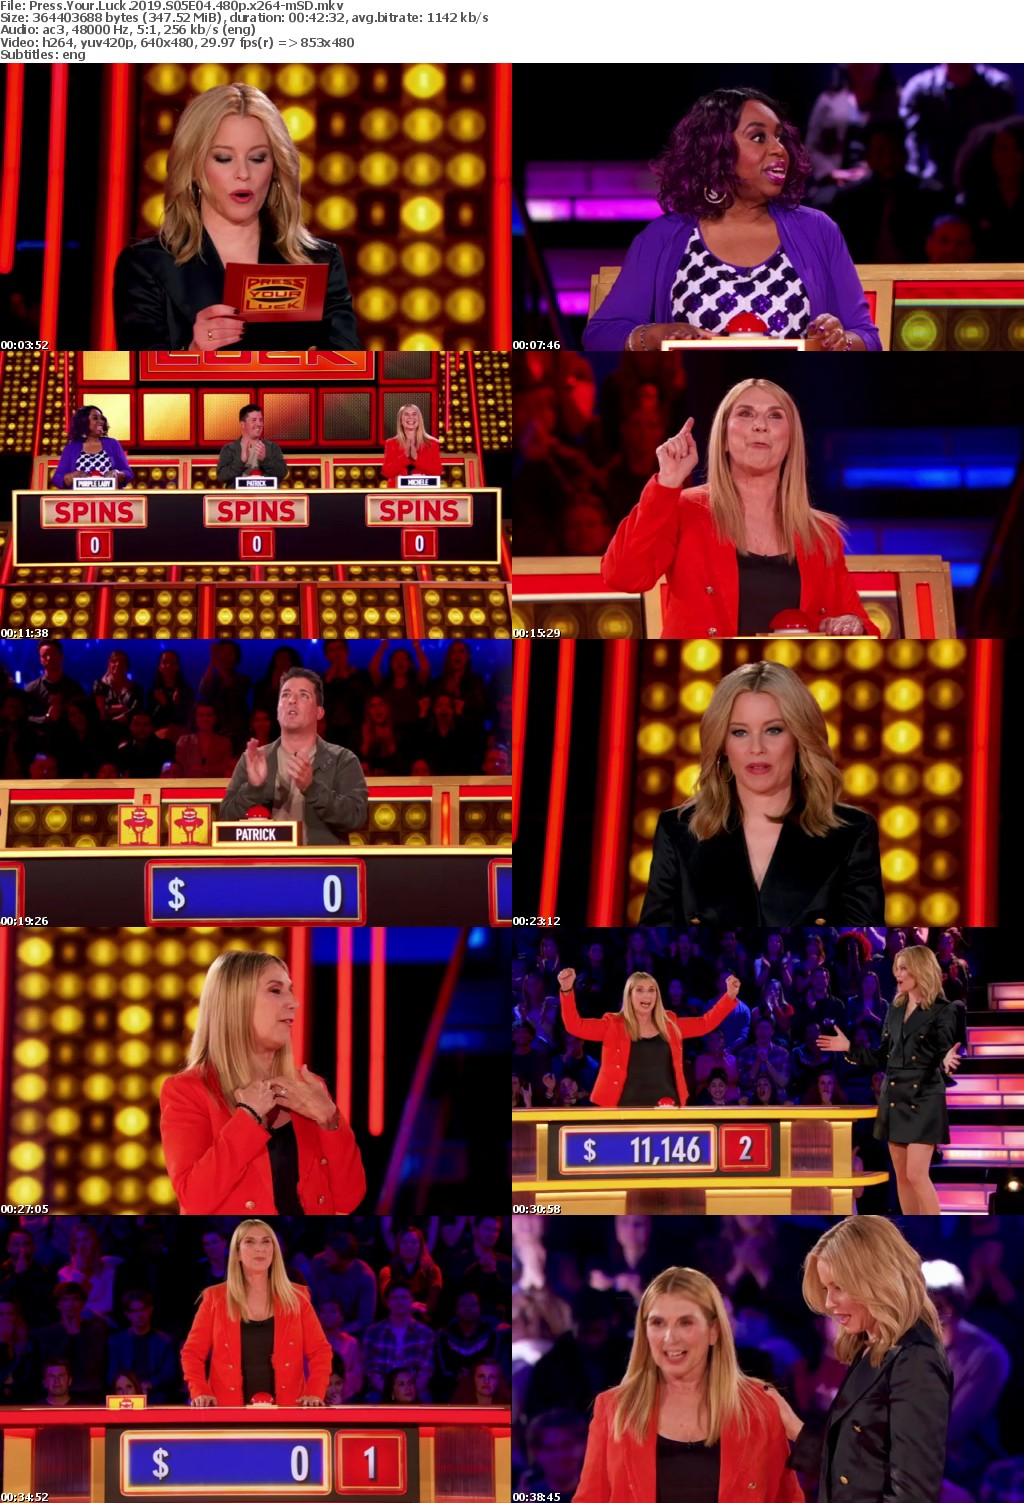 Press Your Luck 2019 S05E04 480p x264-mSD